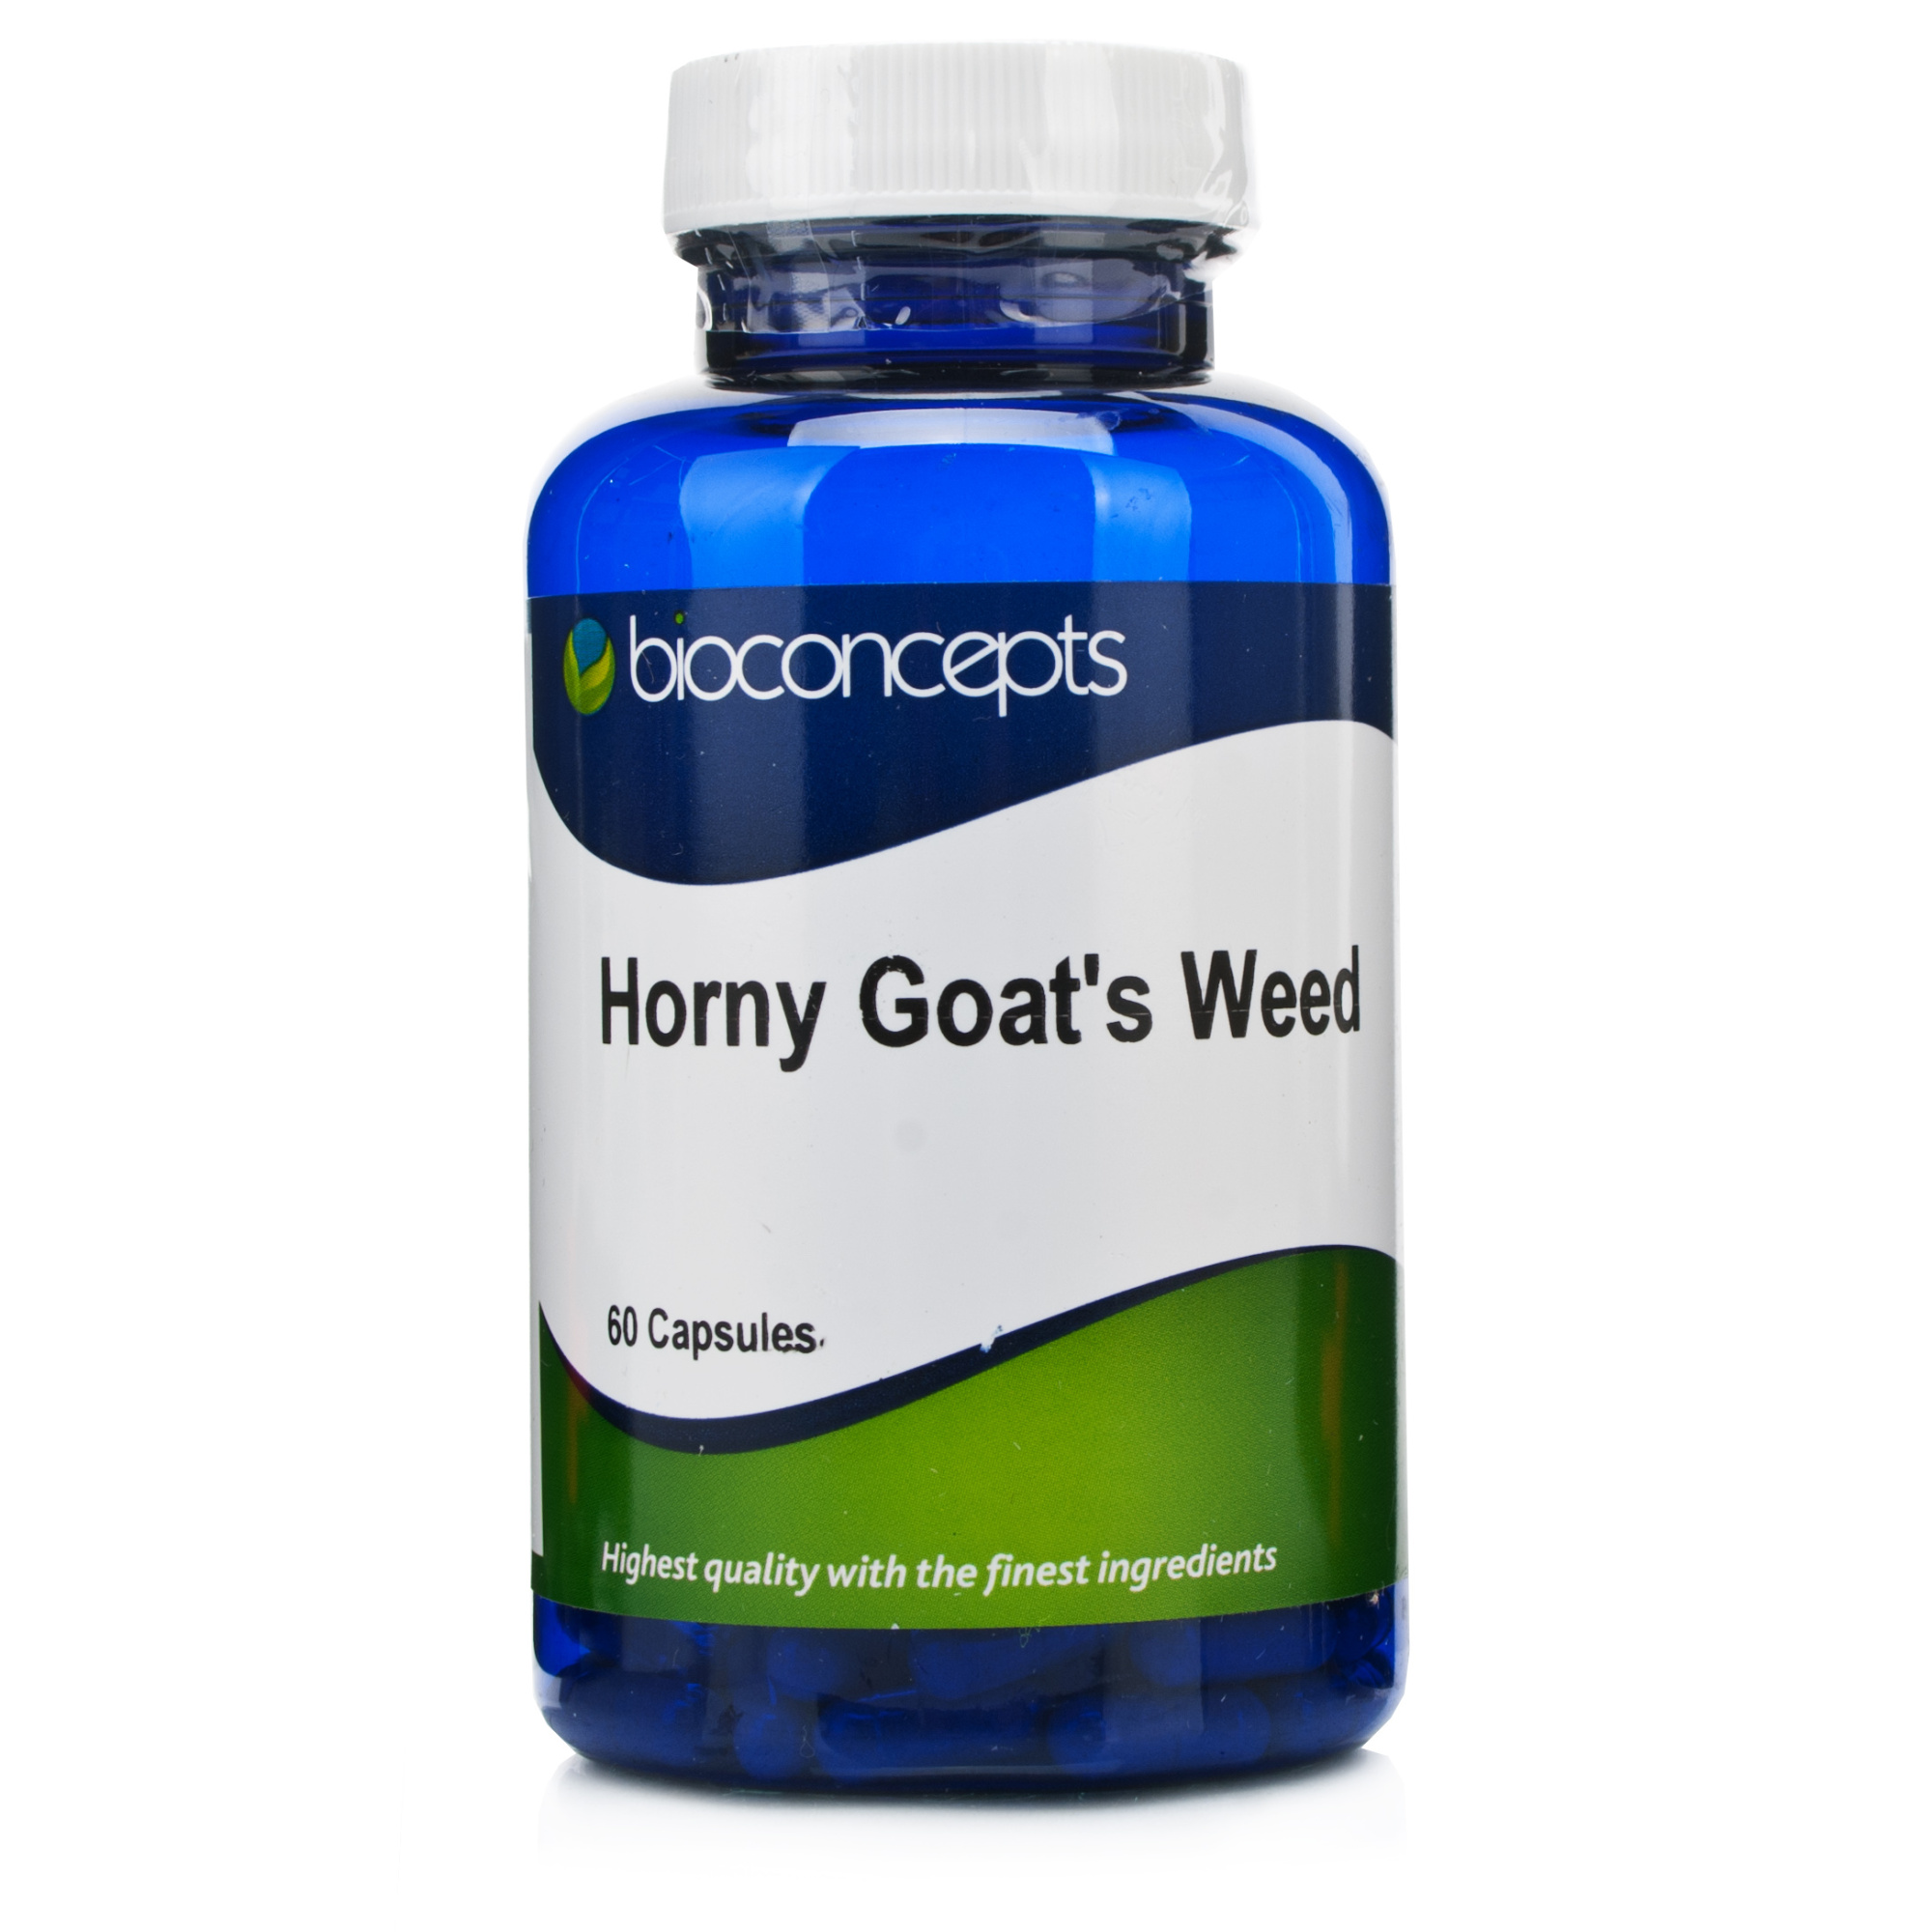 Bioconcepts Horny Goats Weed